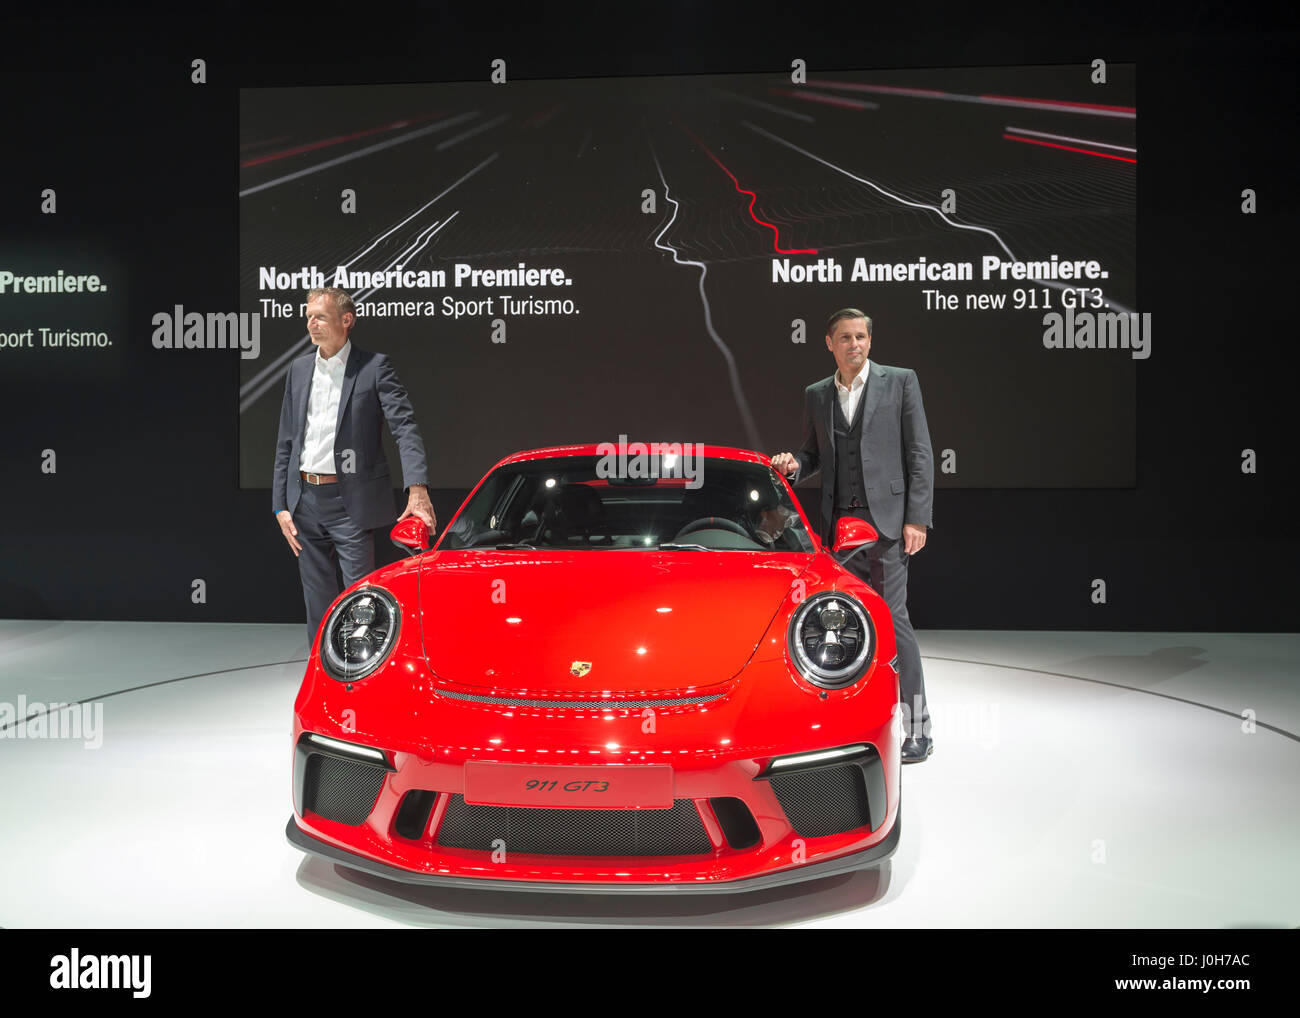 Manhattan, USA. 12th Apr, 2017. R-L, KLAUS ZELLMER, President and Chief Executive Officer of Porsche Cars North America, Inc, and ANDREAS PREUNINGER, GT Project Director Porsche AG, introduce two new cars making their North American Premiere: Panamera Sport Turisomo (silver car on left) and 911 GT3 (red car on right) during the Porsche Press Conference at the New York International Auto Show, NYIAS, during the first Press Day at the Javits Center. Credit: Ann E Parry/Alamy Live News Stock Photo